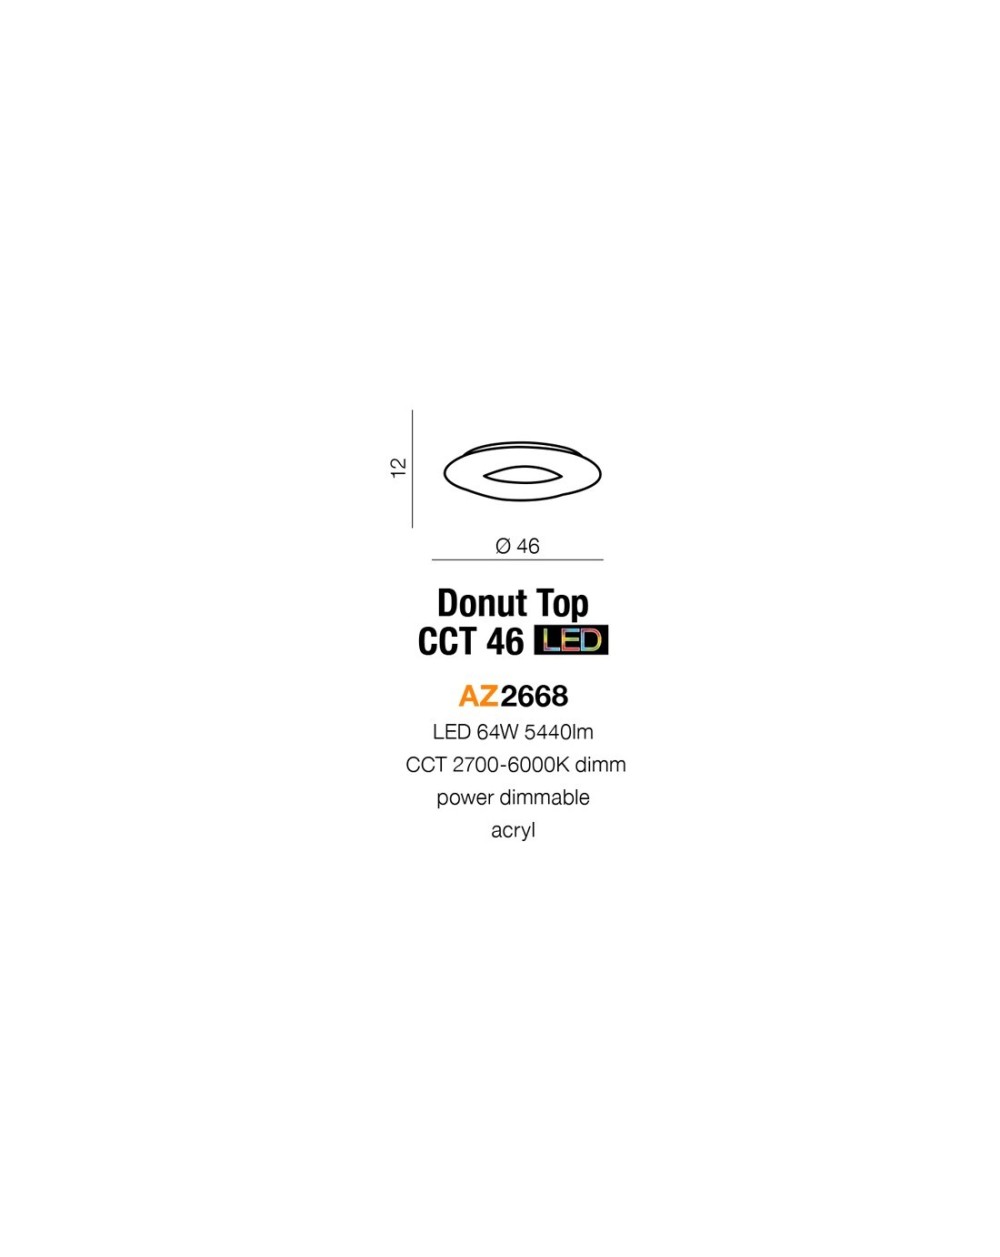 DONUT TOP 46 CCT REMOTE